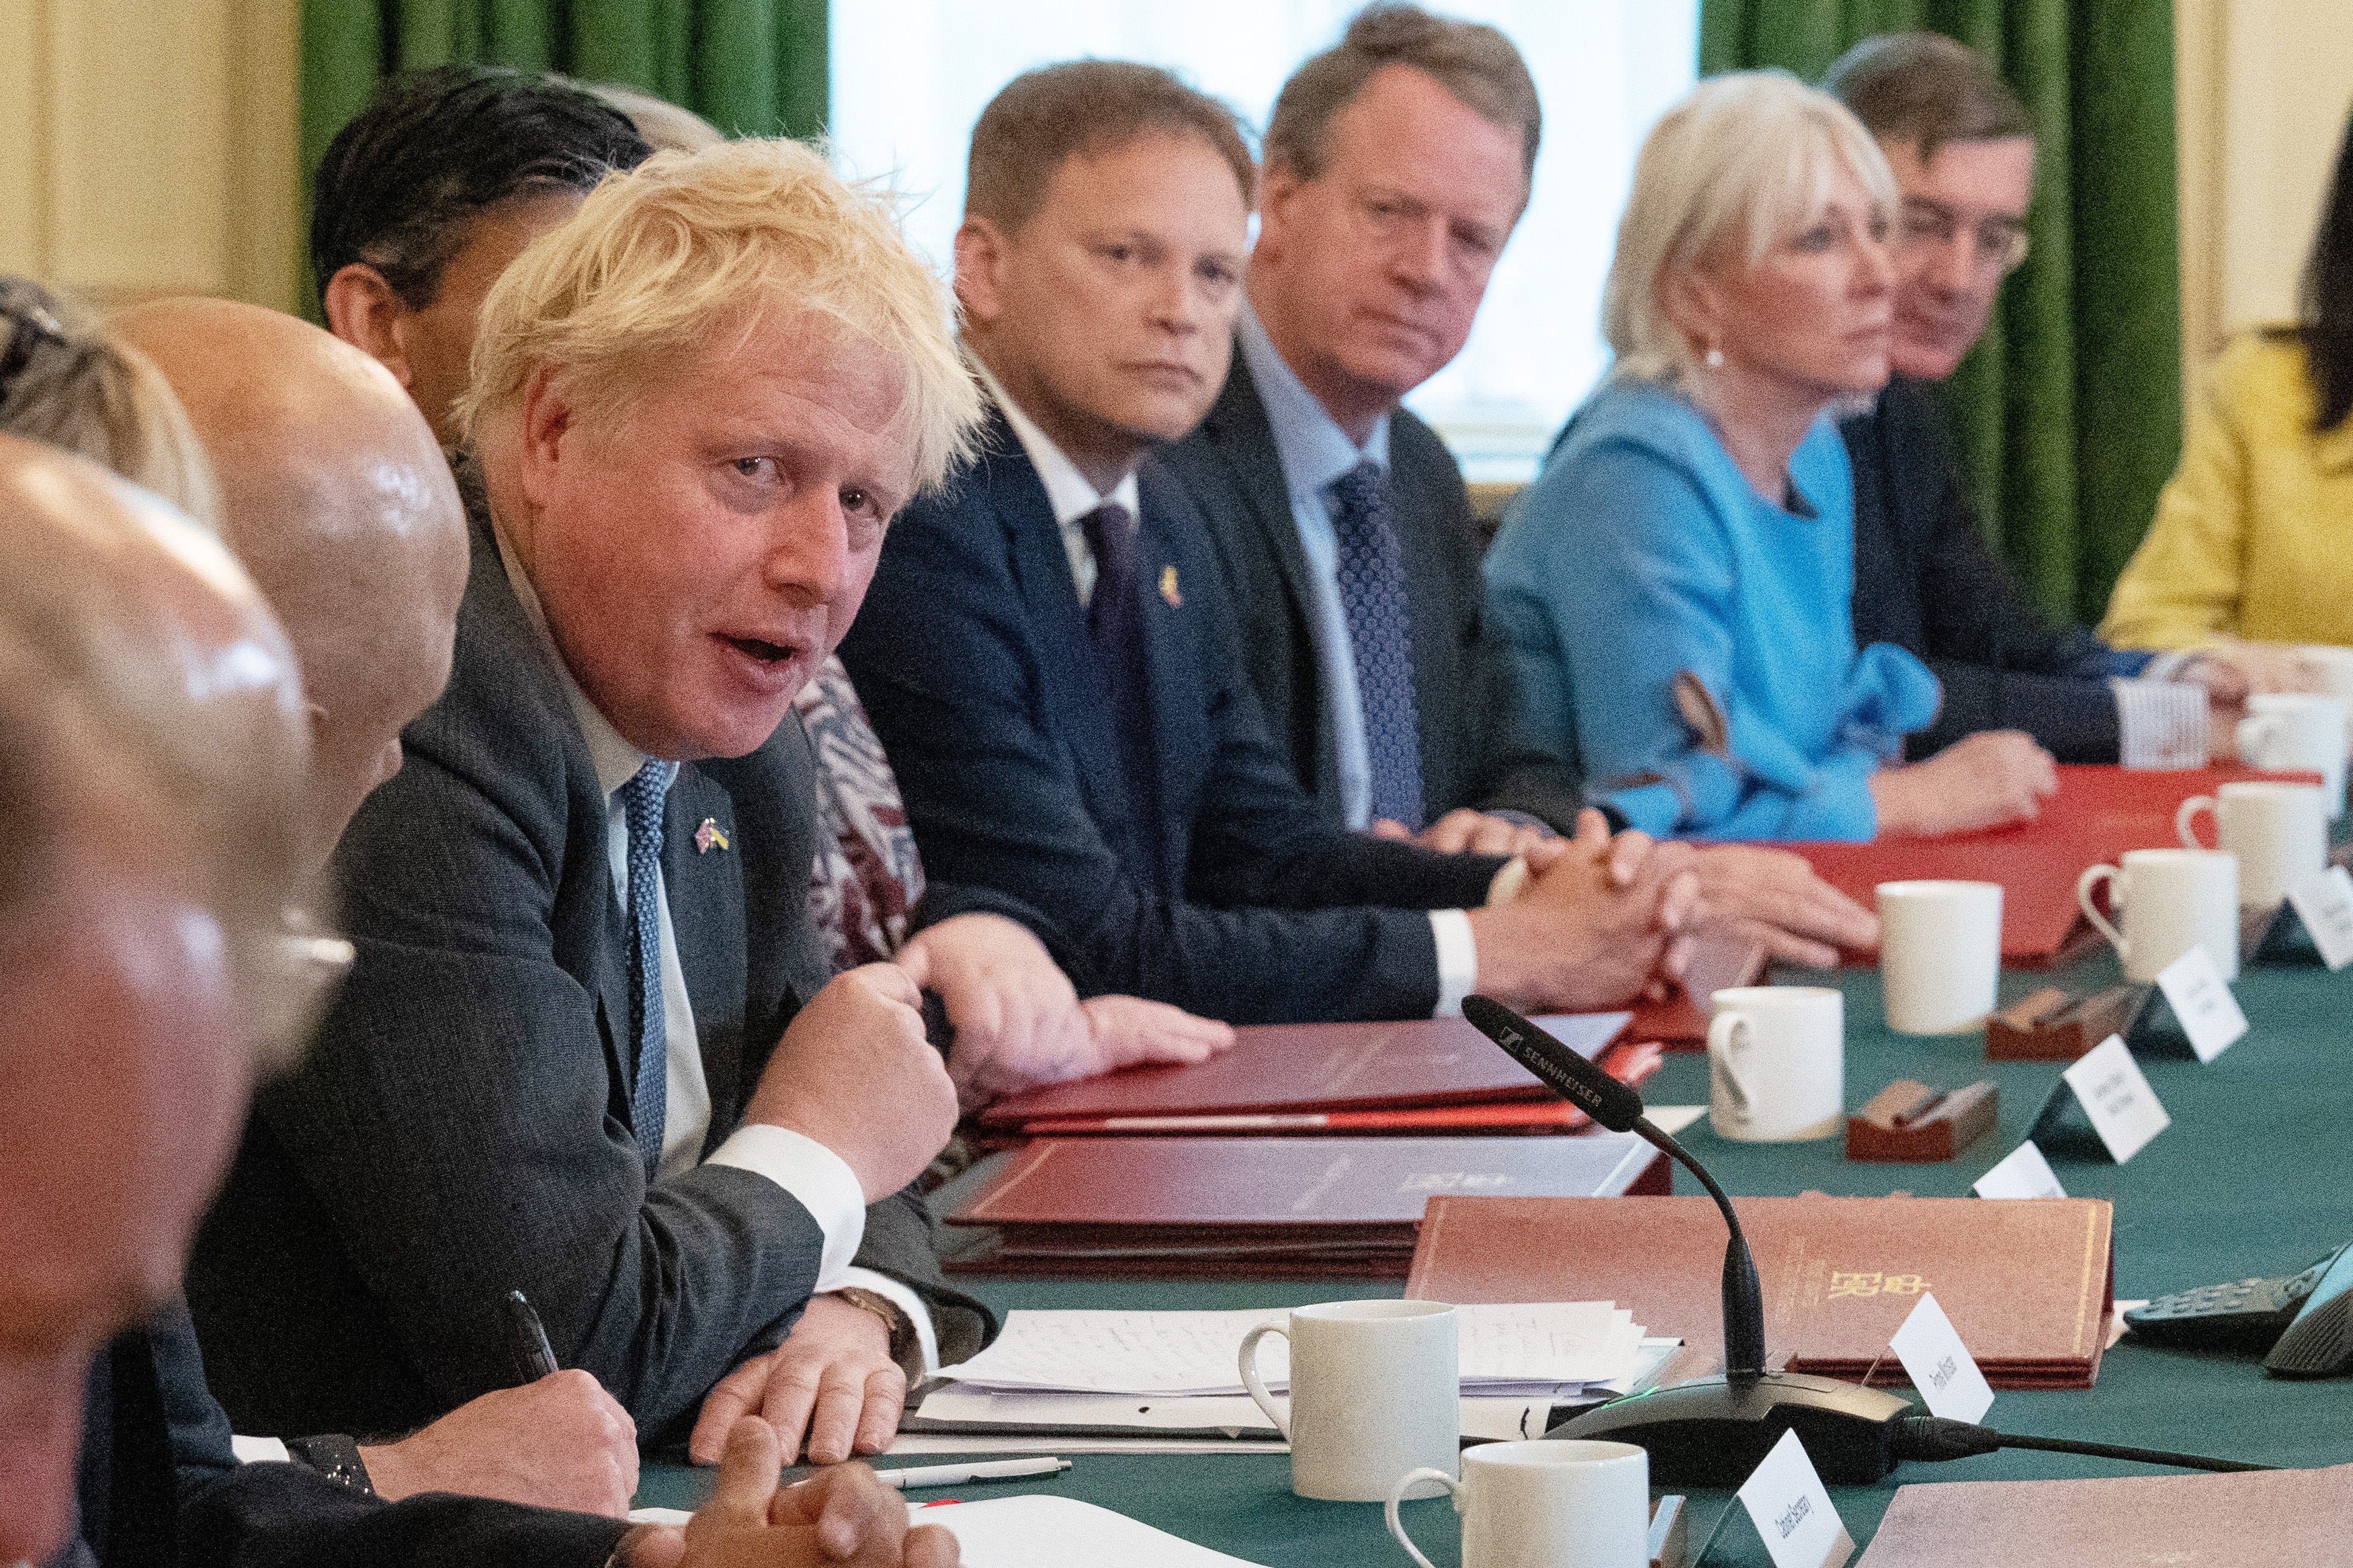 Unions have accused Boris Johnson of pursuing a “race to the bottom” on pay, as the prime minister set the scene for months of confrontation with striking workers